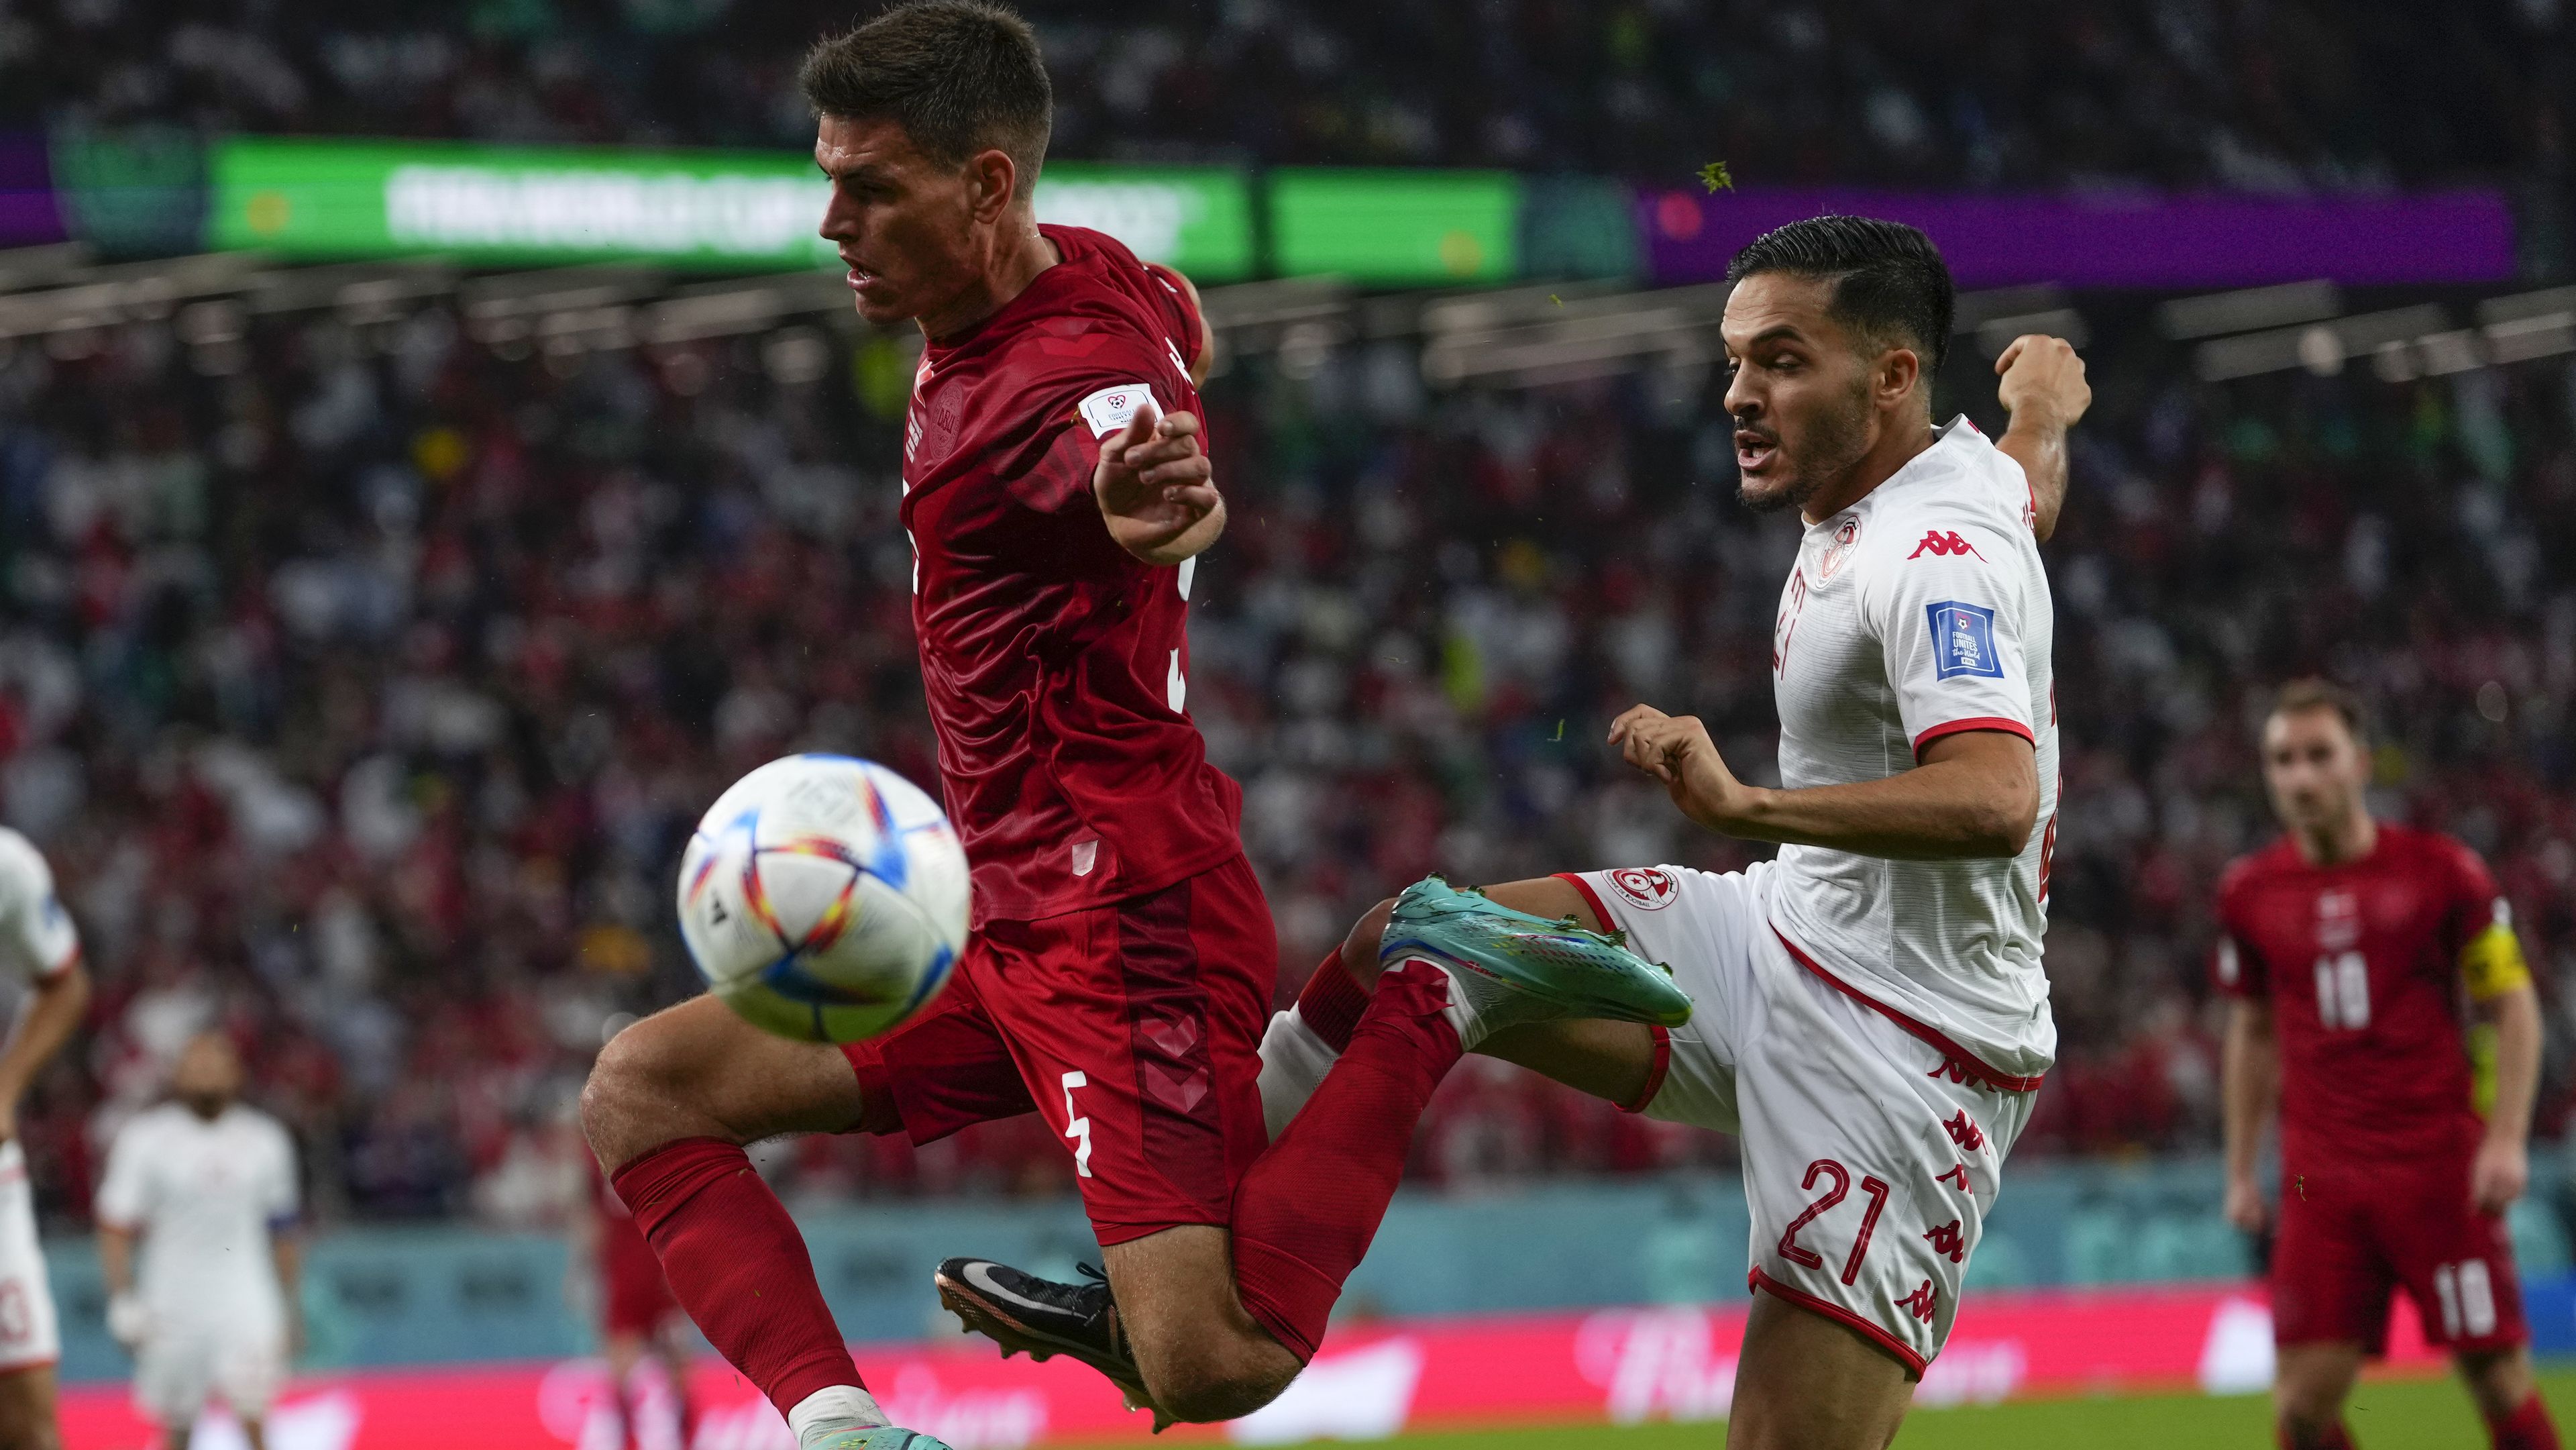 Denmark&#x27;s Joakim Maehle, left, vies for the ball with Tunisia&#x27;s Wajdi Kechrida during the World Cup group D soccer match between Denmark and Tunisia, at the Education City Stadium in Al Rayyan, Qatar, Tuesday, Nov. 22, 2022 